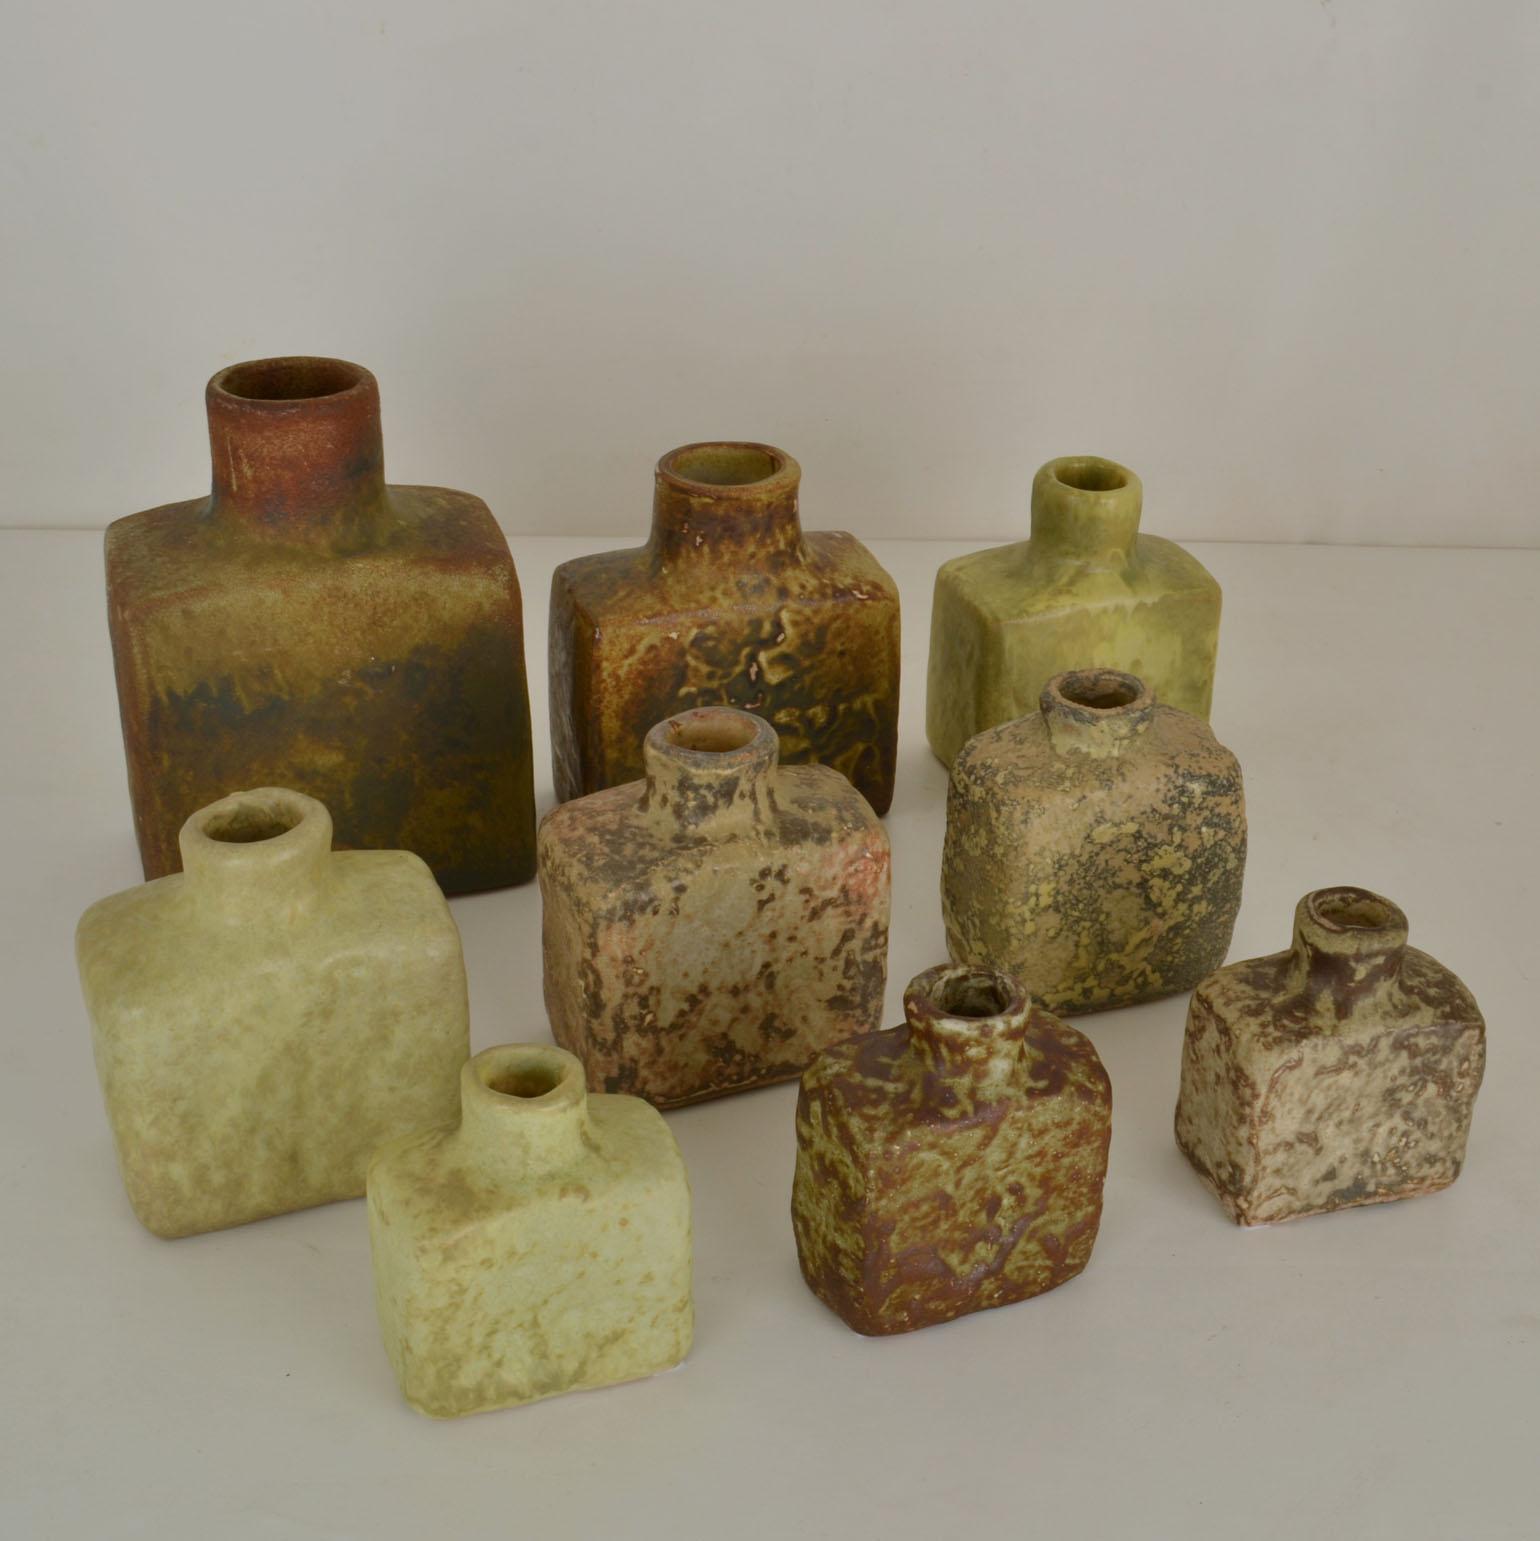 Group of Square Studio Ceramic Vases in Sage and Earth Tones 1